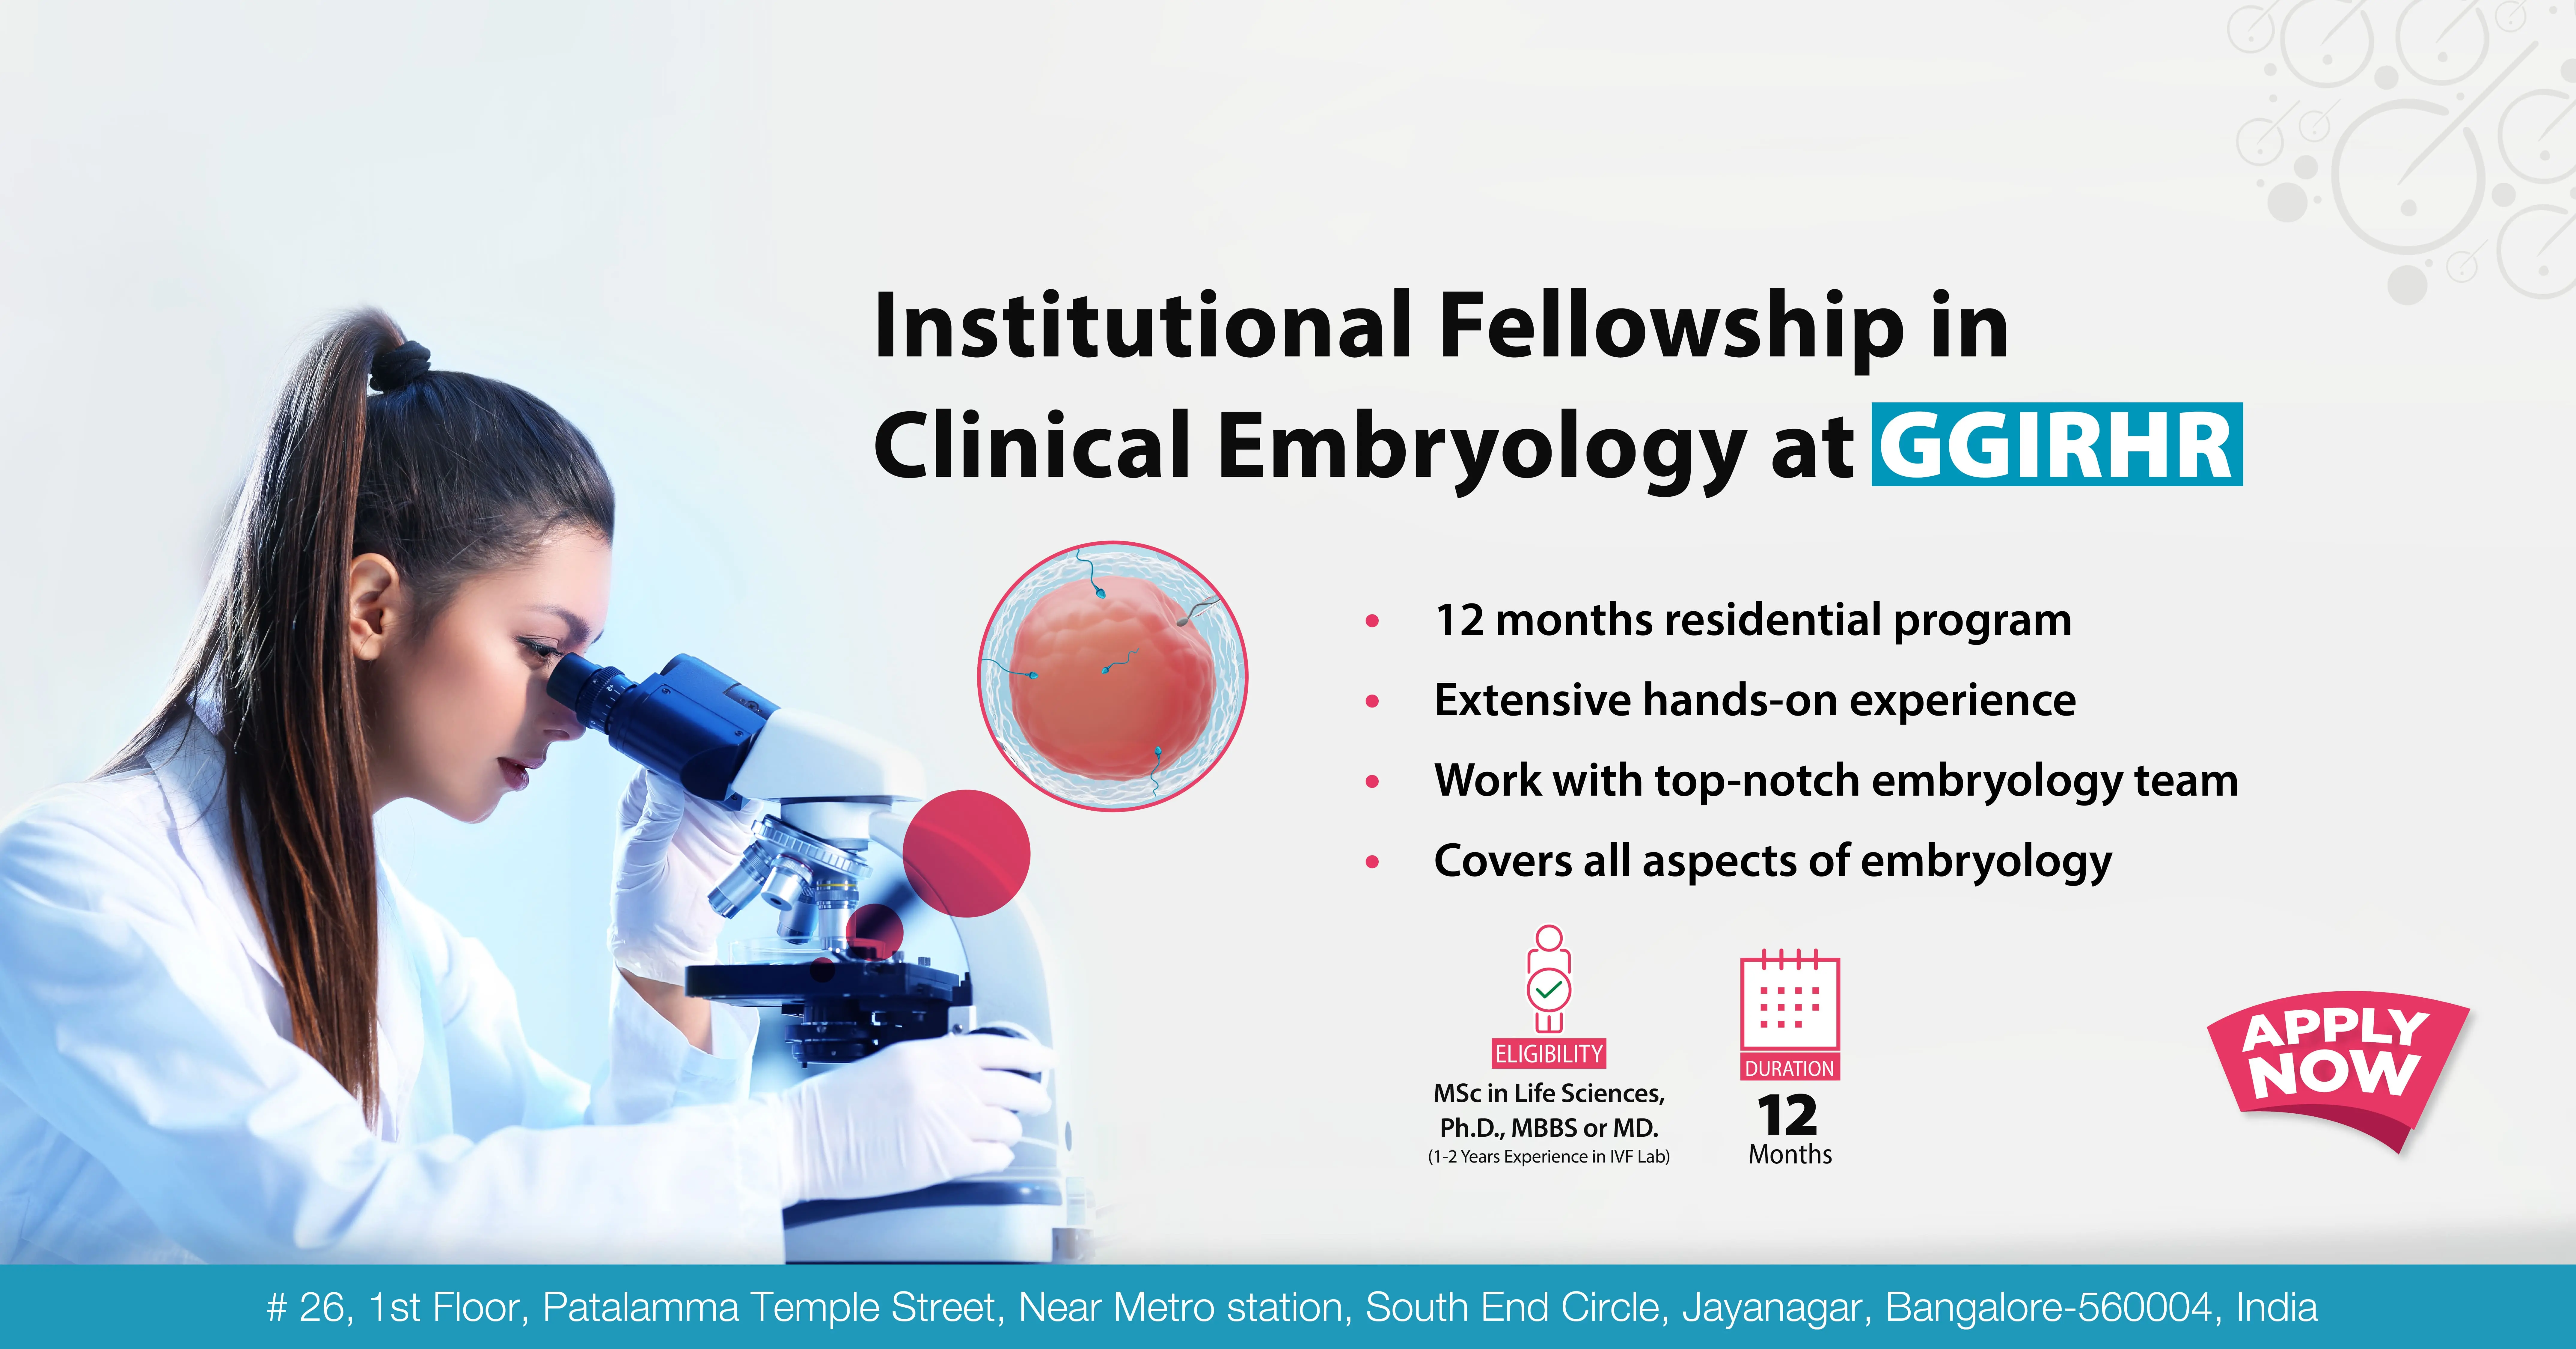 Institutional Fellowship in Clinical Embryology